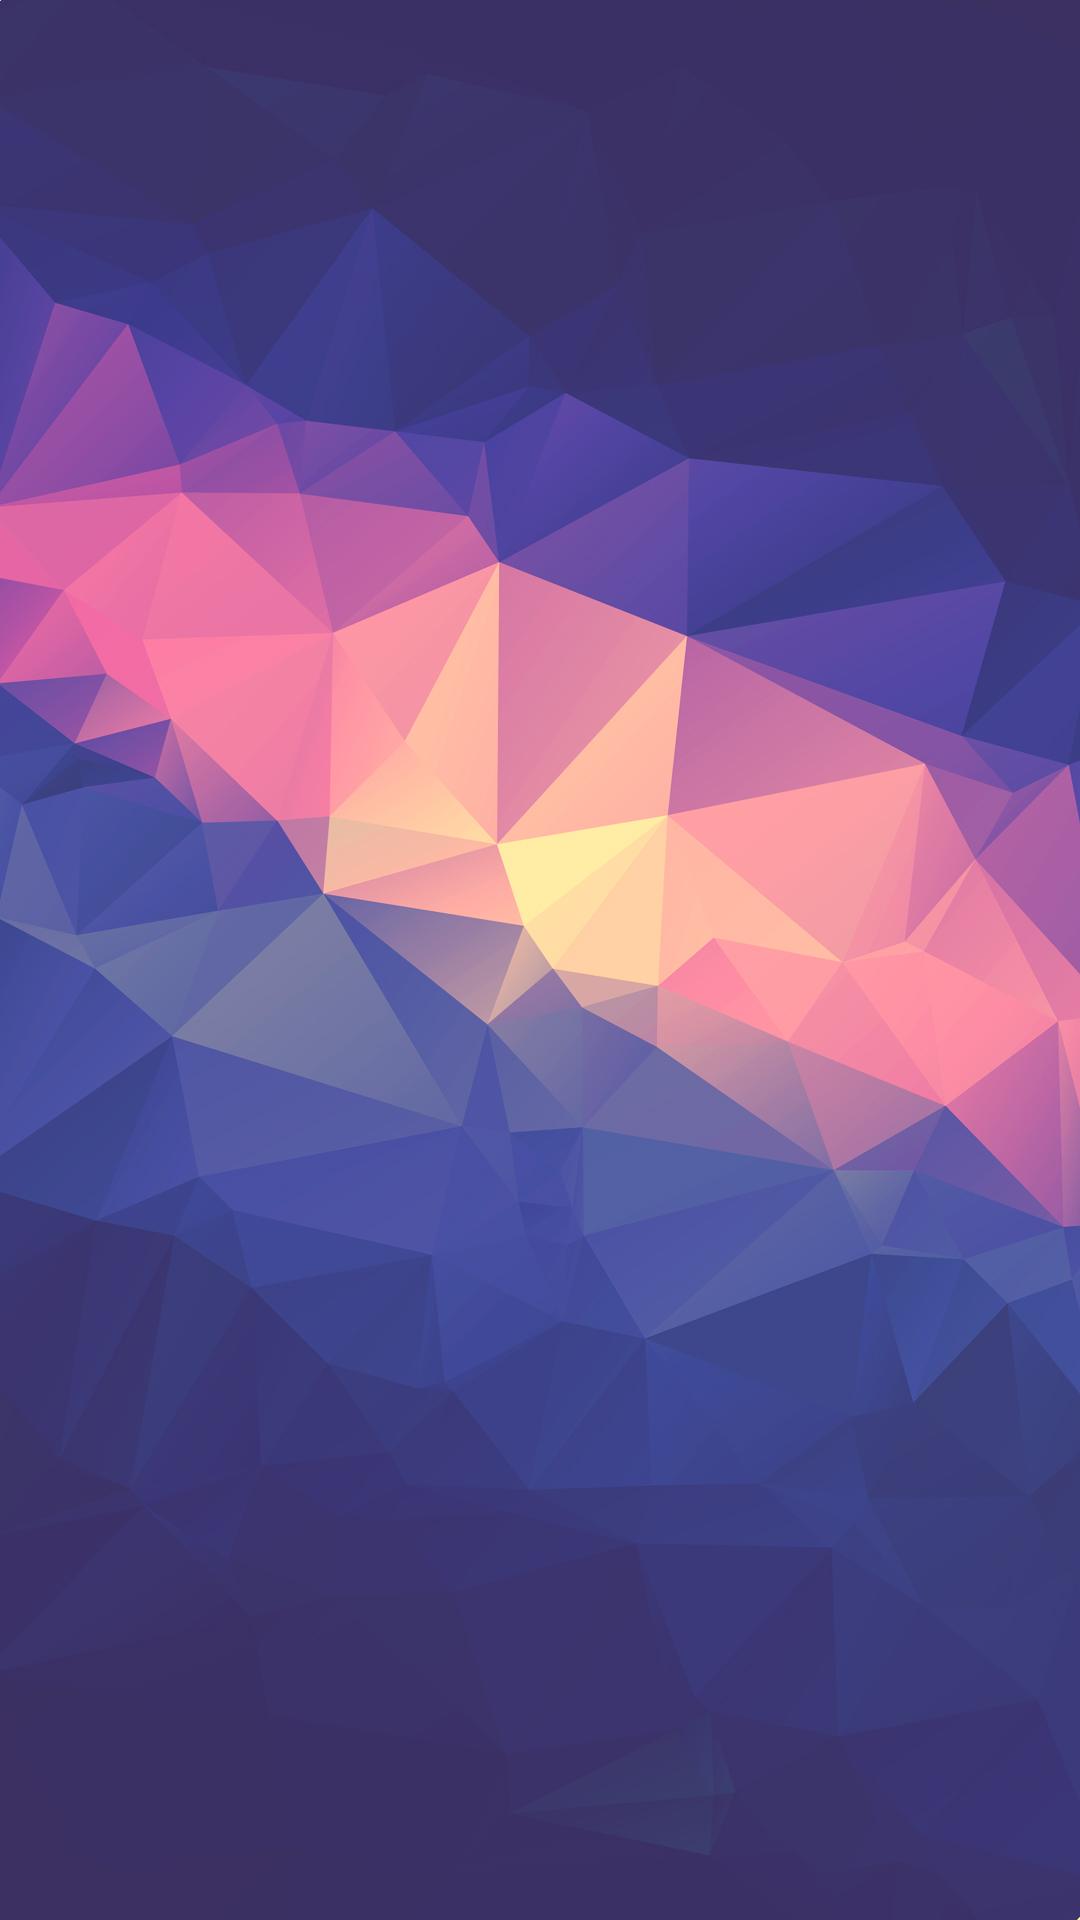 Low Poly iPhone Wallpapers - Top Free Low Poly iPhone Backgrounds ...